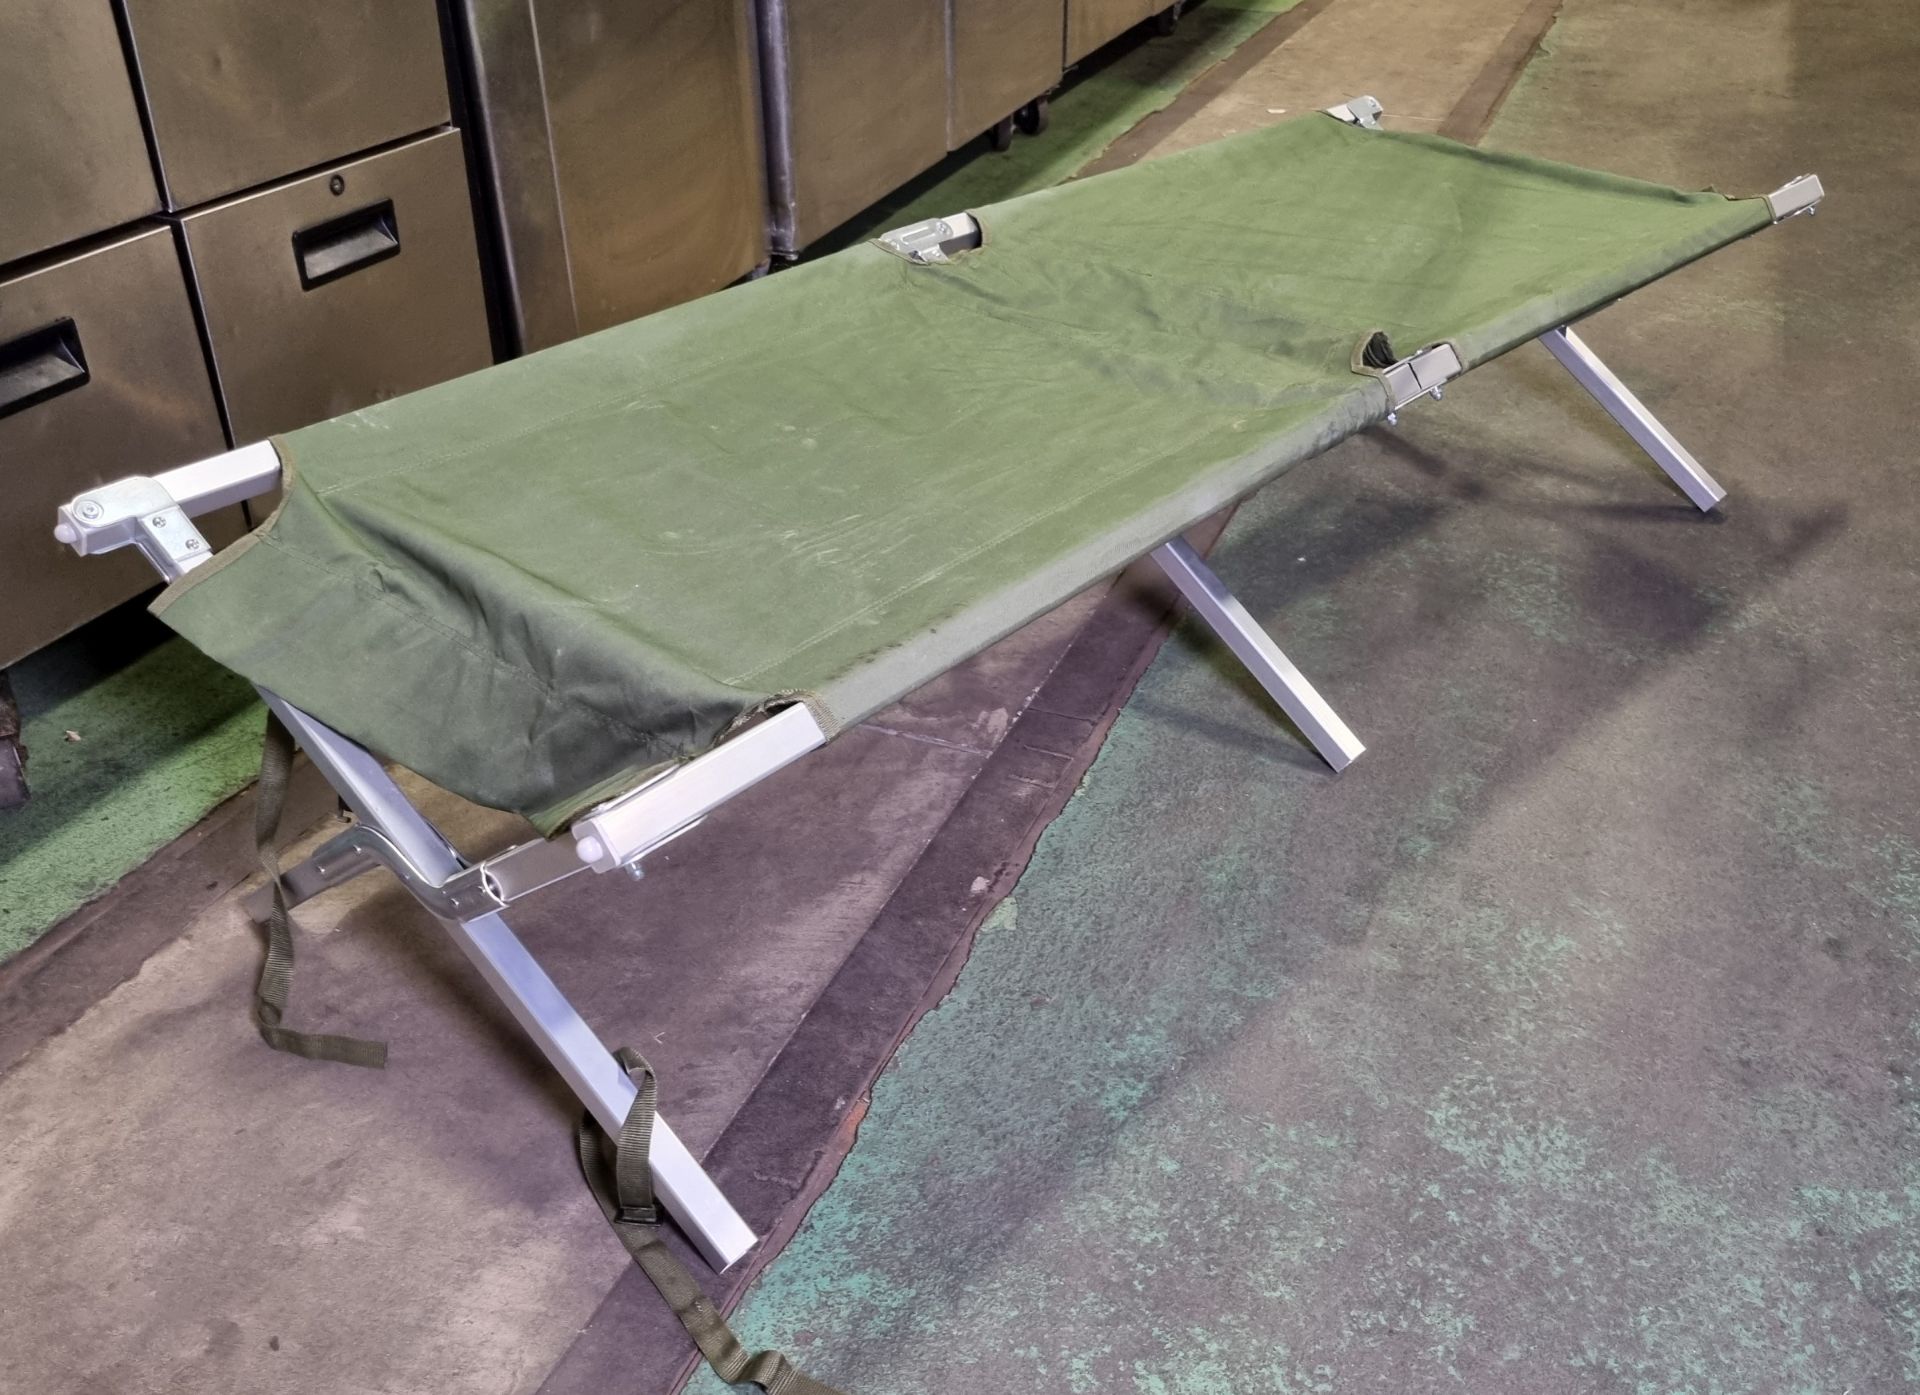 15x Folding field cots with carry bag - L 1900 x W 700 x H 450mm - Image 2 of 5